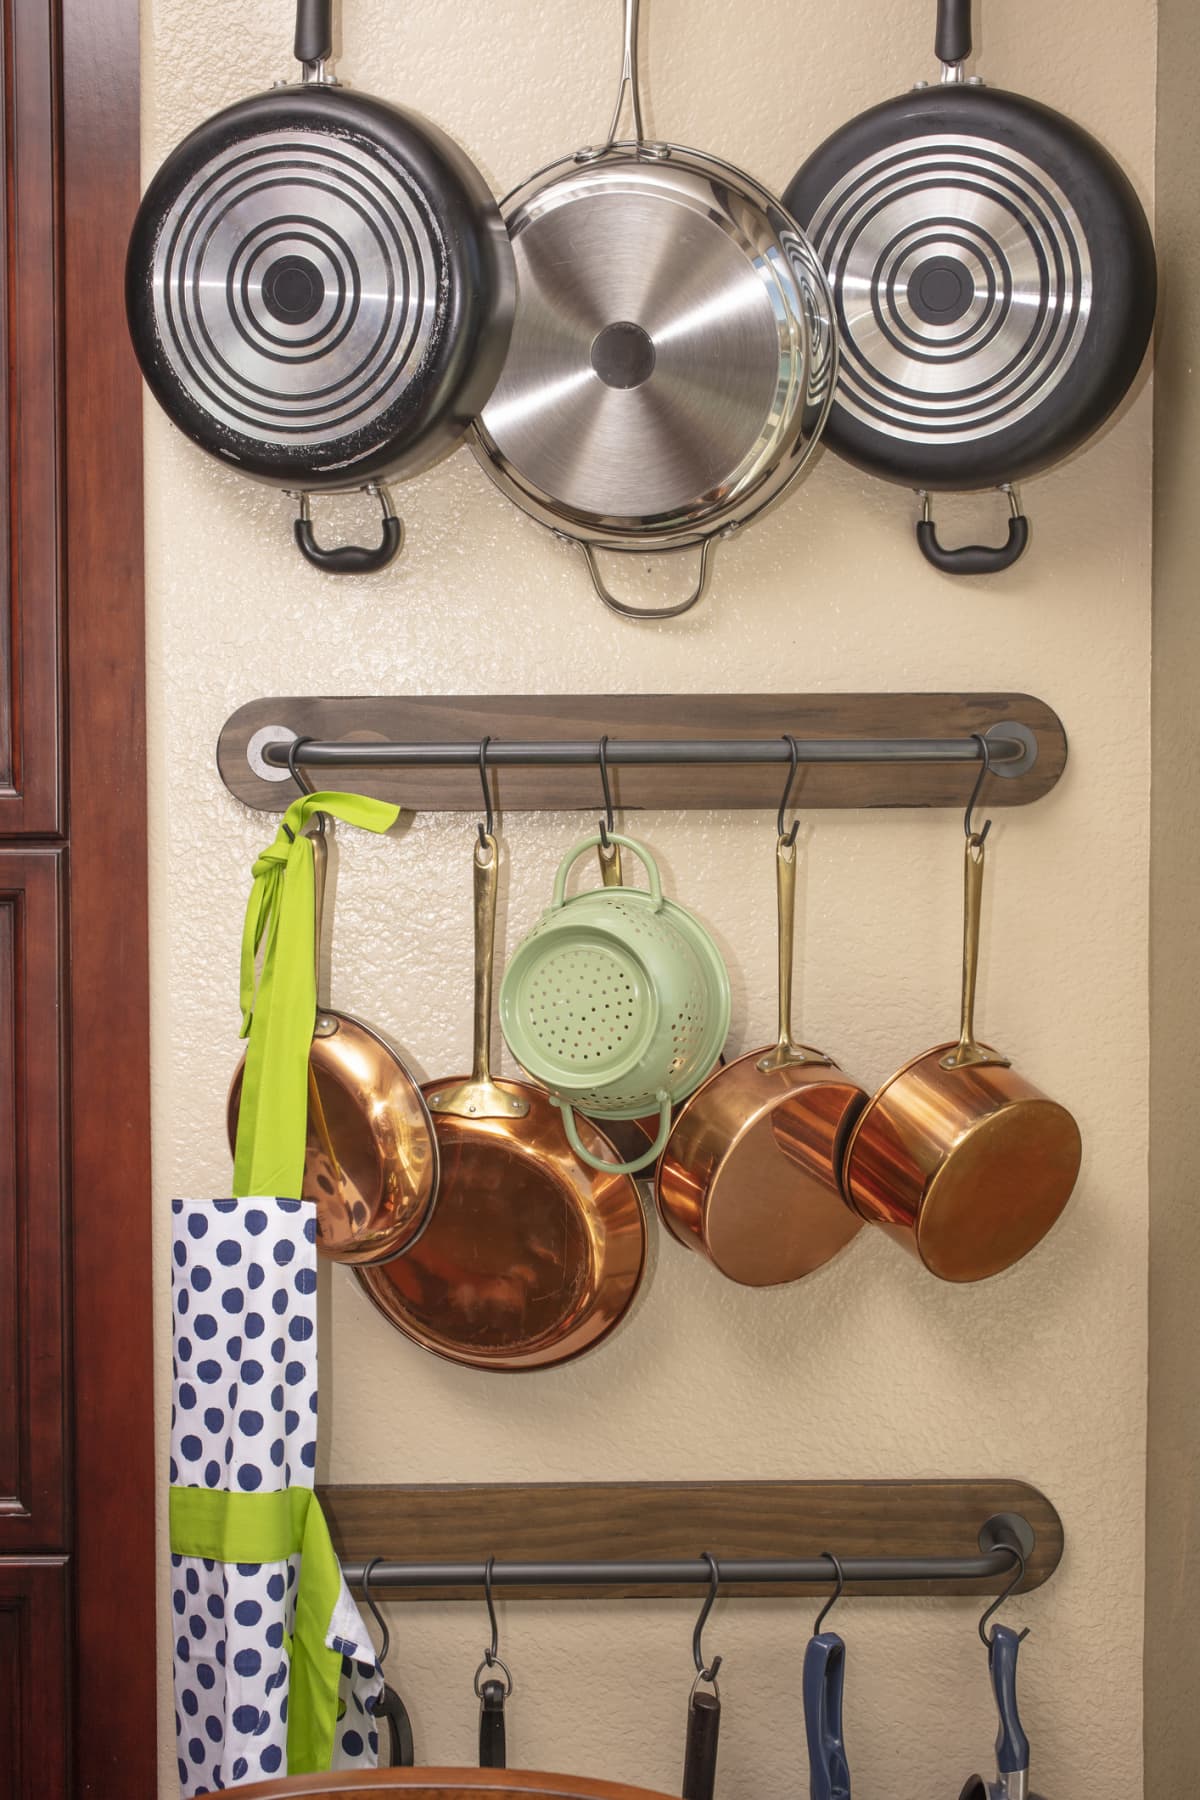 Pots hanging on wall racks in a kitchen